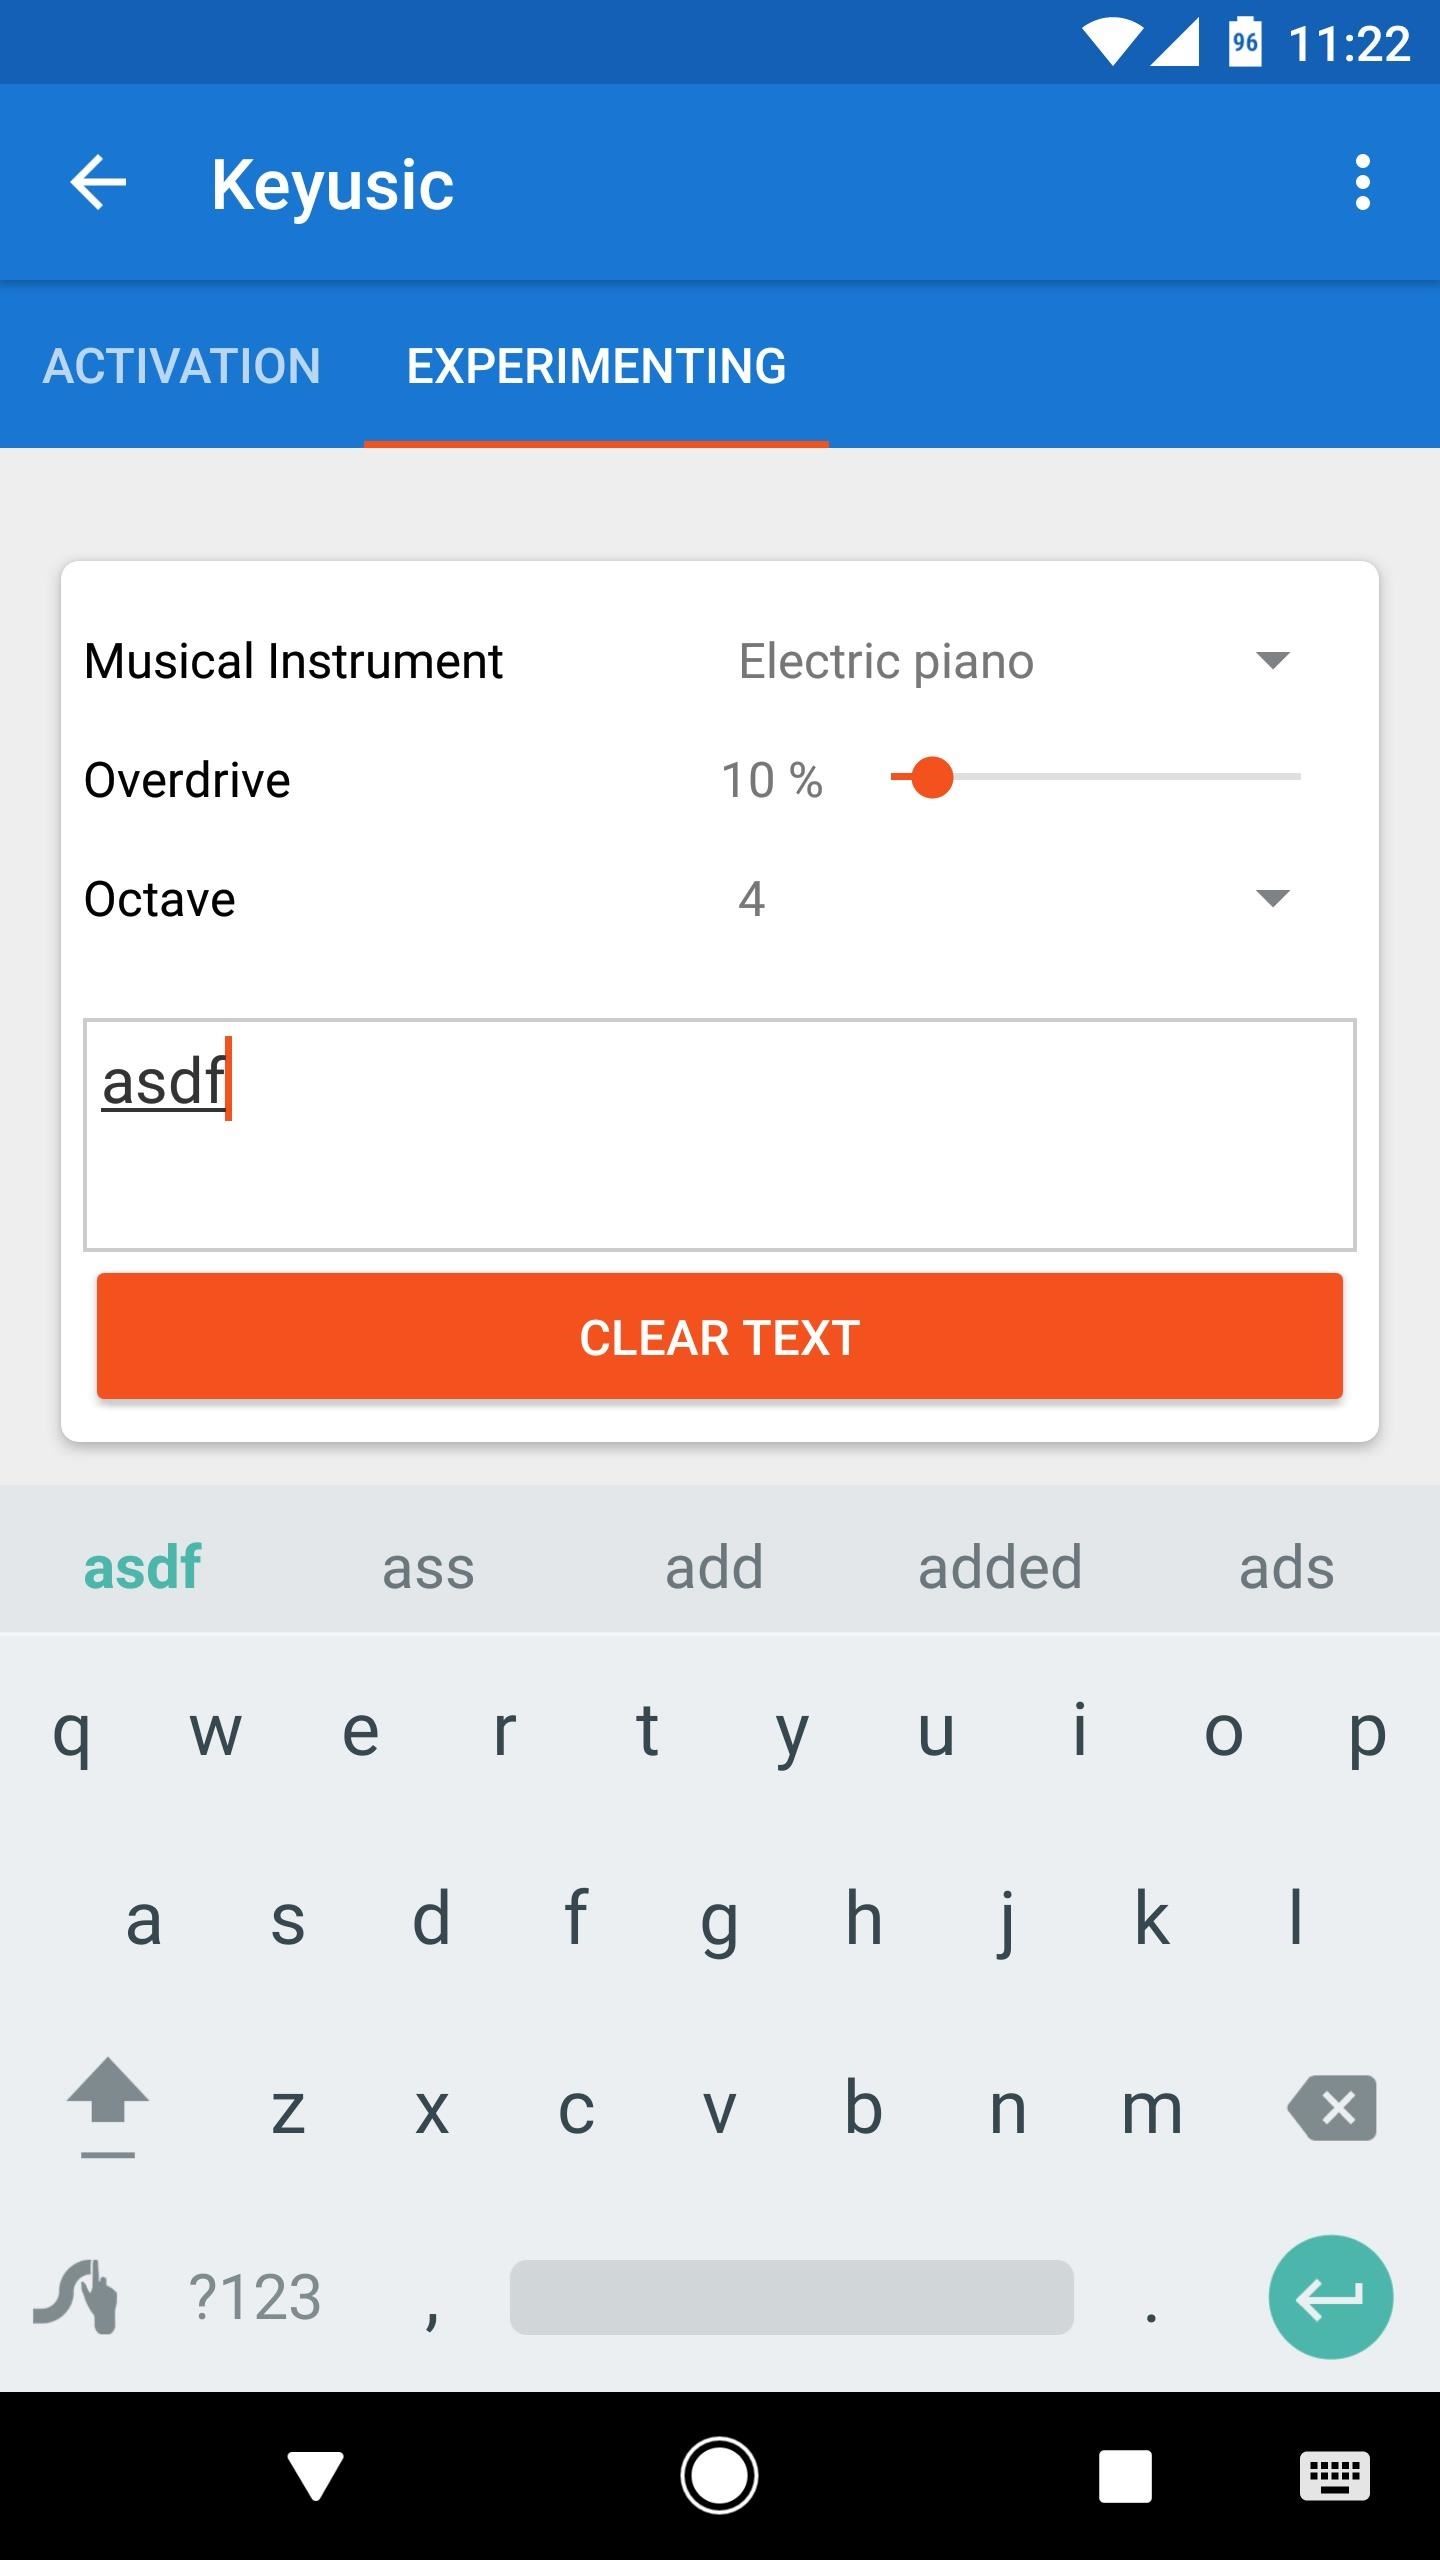 How to Make Any Android Keyboard Play Sounds as You Type